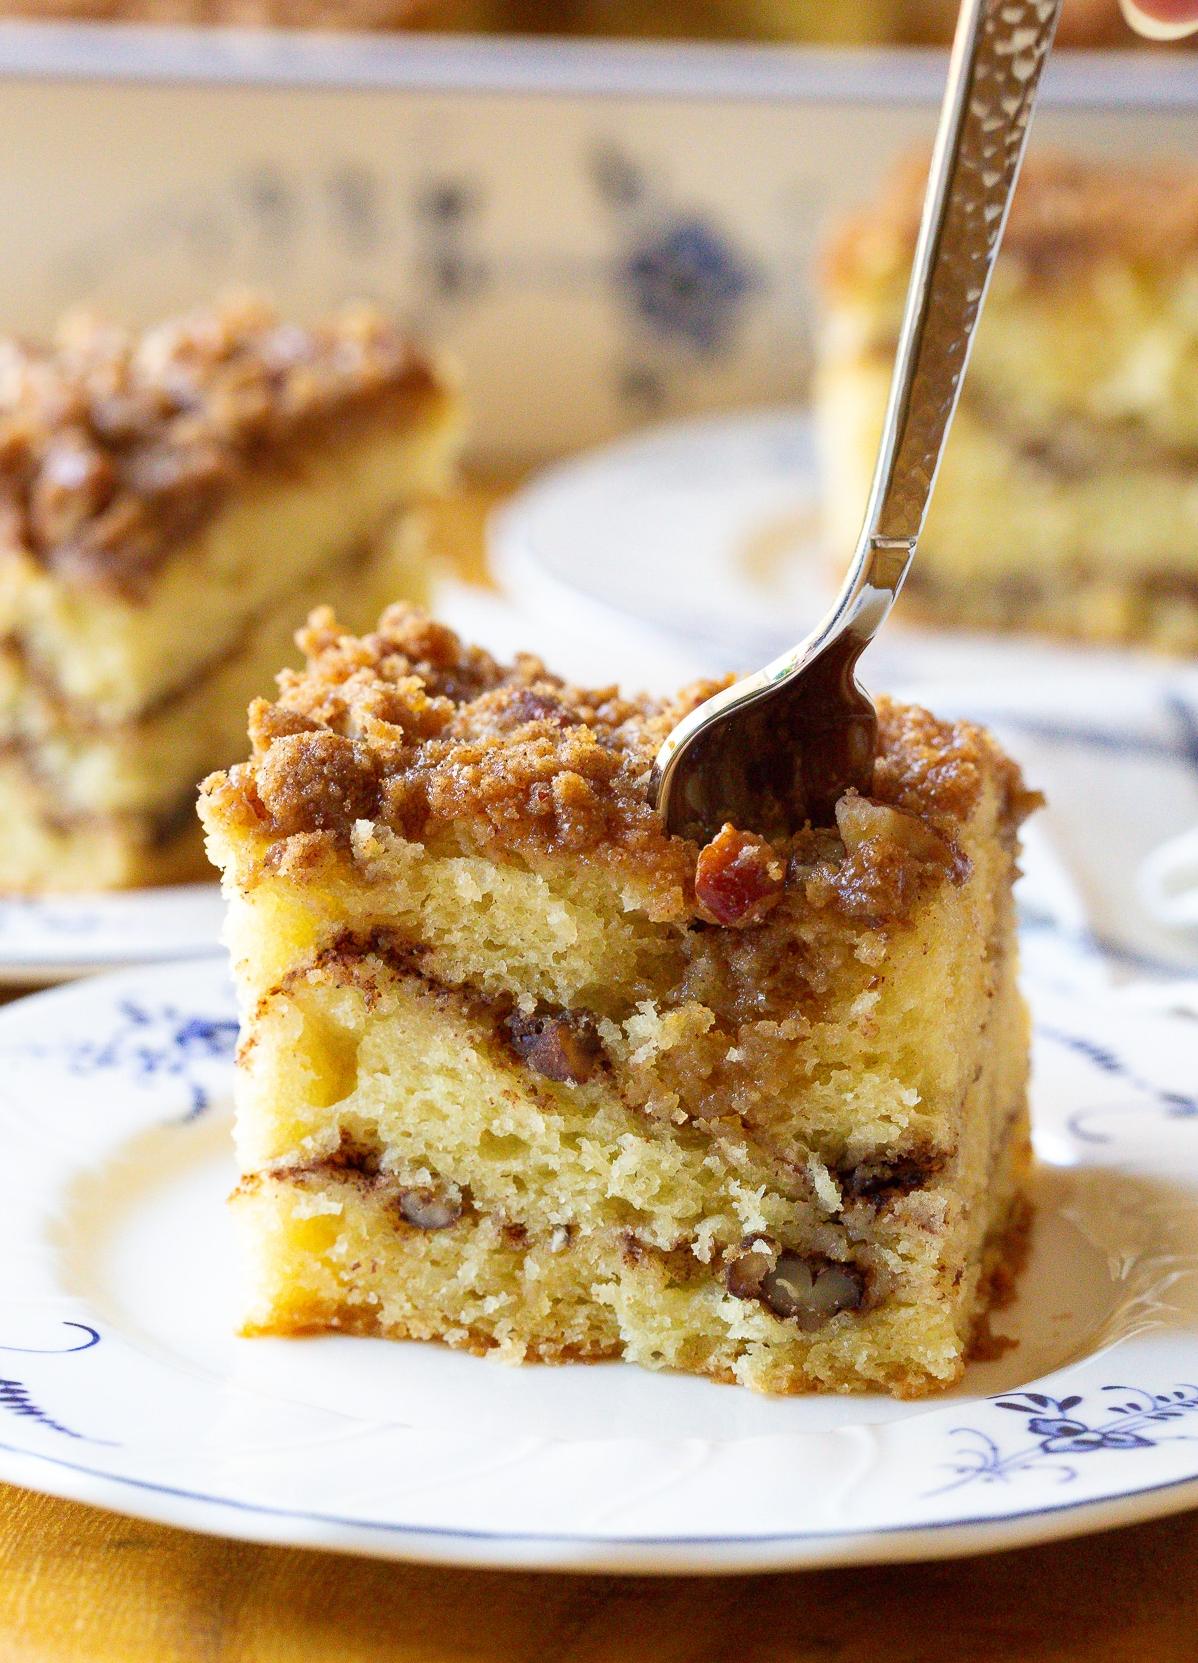  Our Kahlua Coffee Cake is an instant classic – you won't be able to get enough!